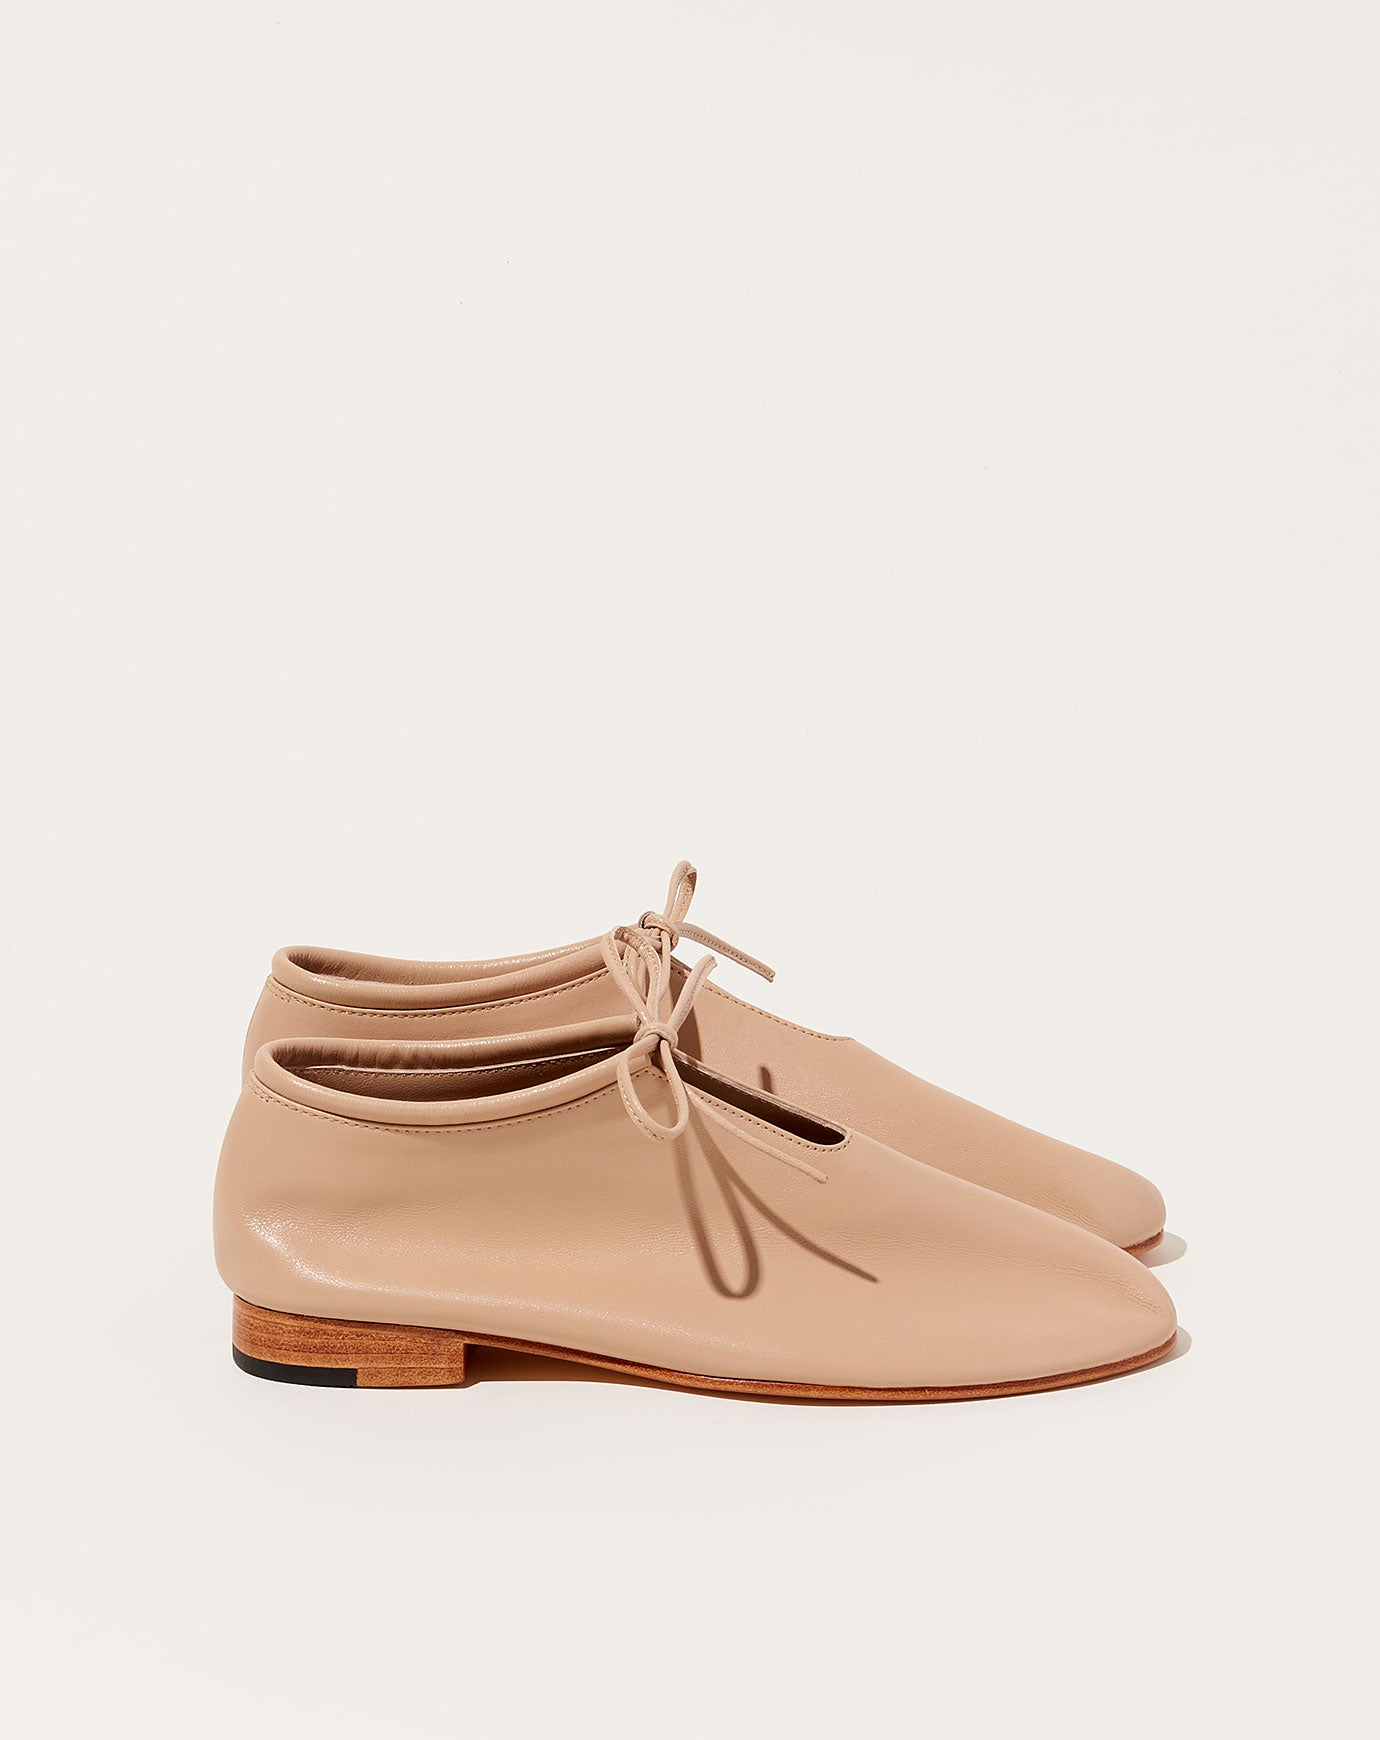 Martiniano Bootie in Antelope